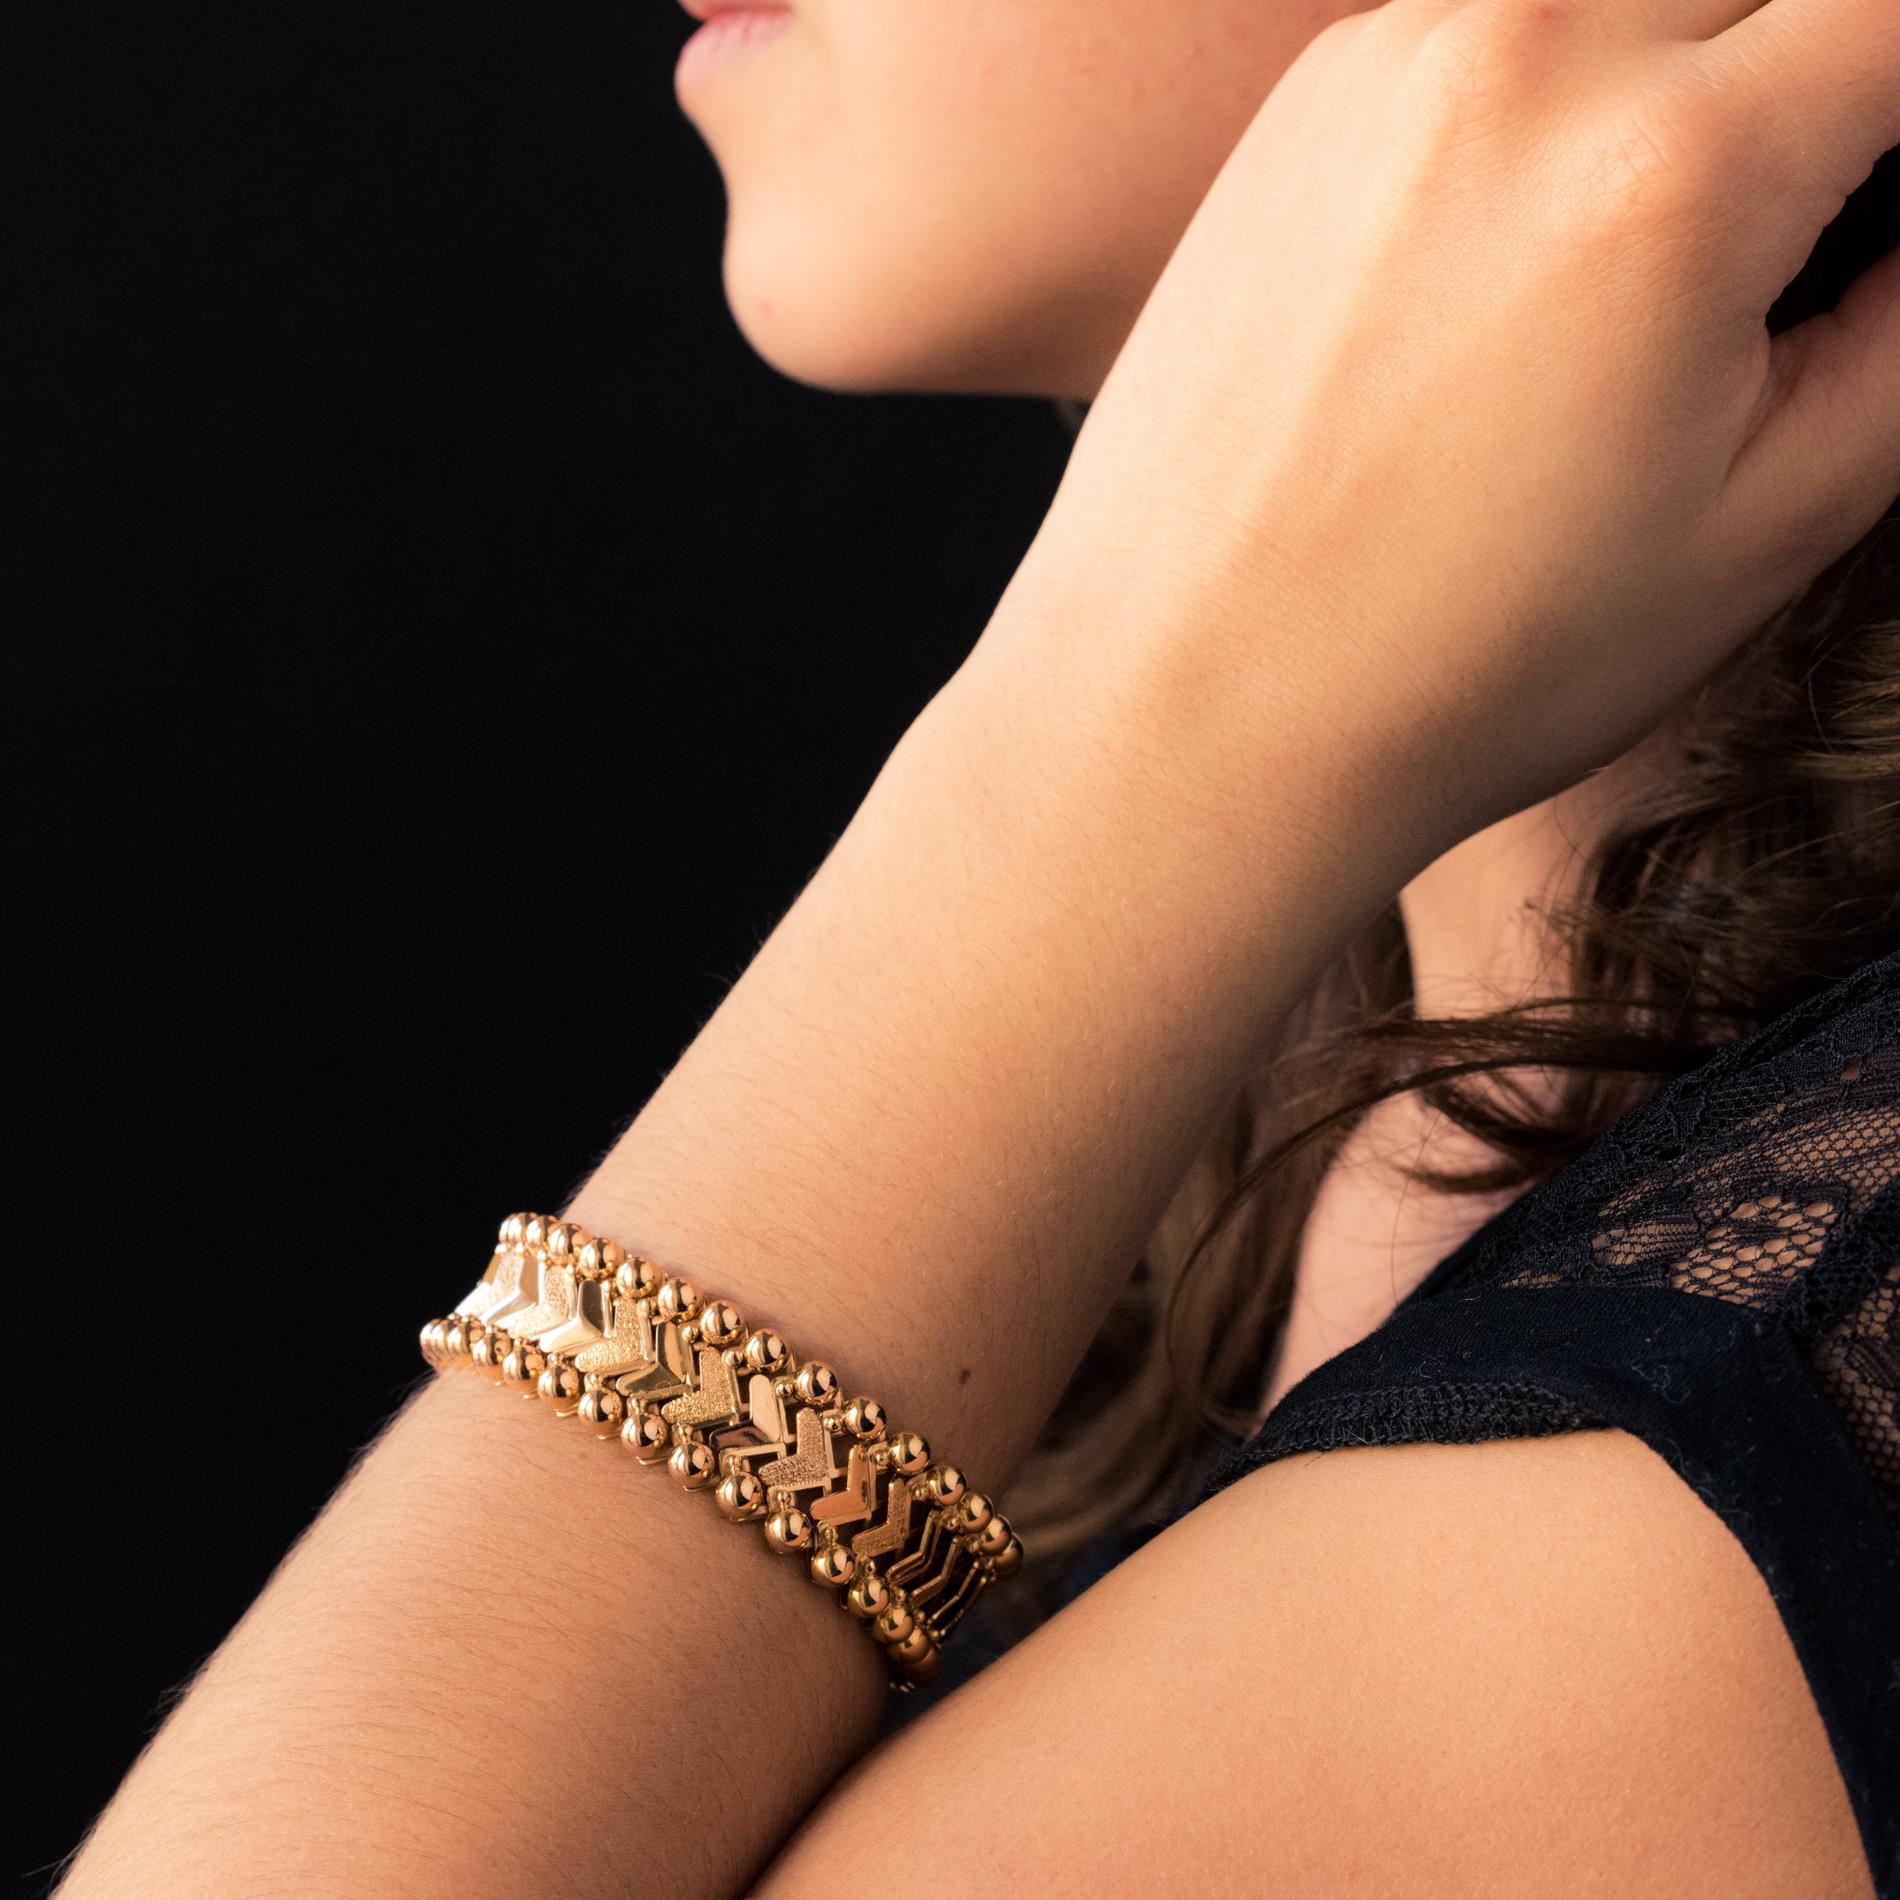 Bracelet in 18 karat yellow gold.
Original, this retro bracelet is made up of alternating smooth and chiseled arrowhead patterns, and articulated between them. They are bordered on either side with gold pearls. The clasp is ratchet with safety